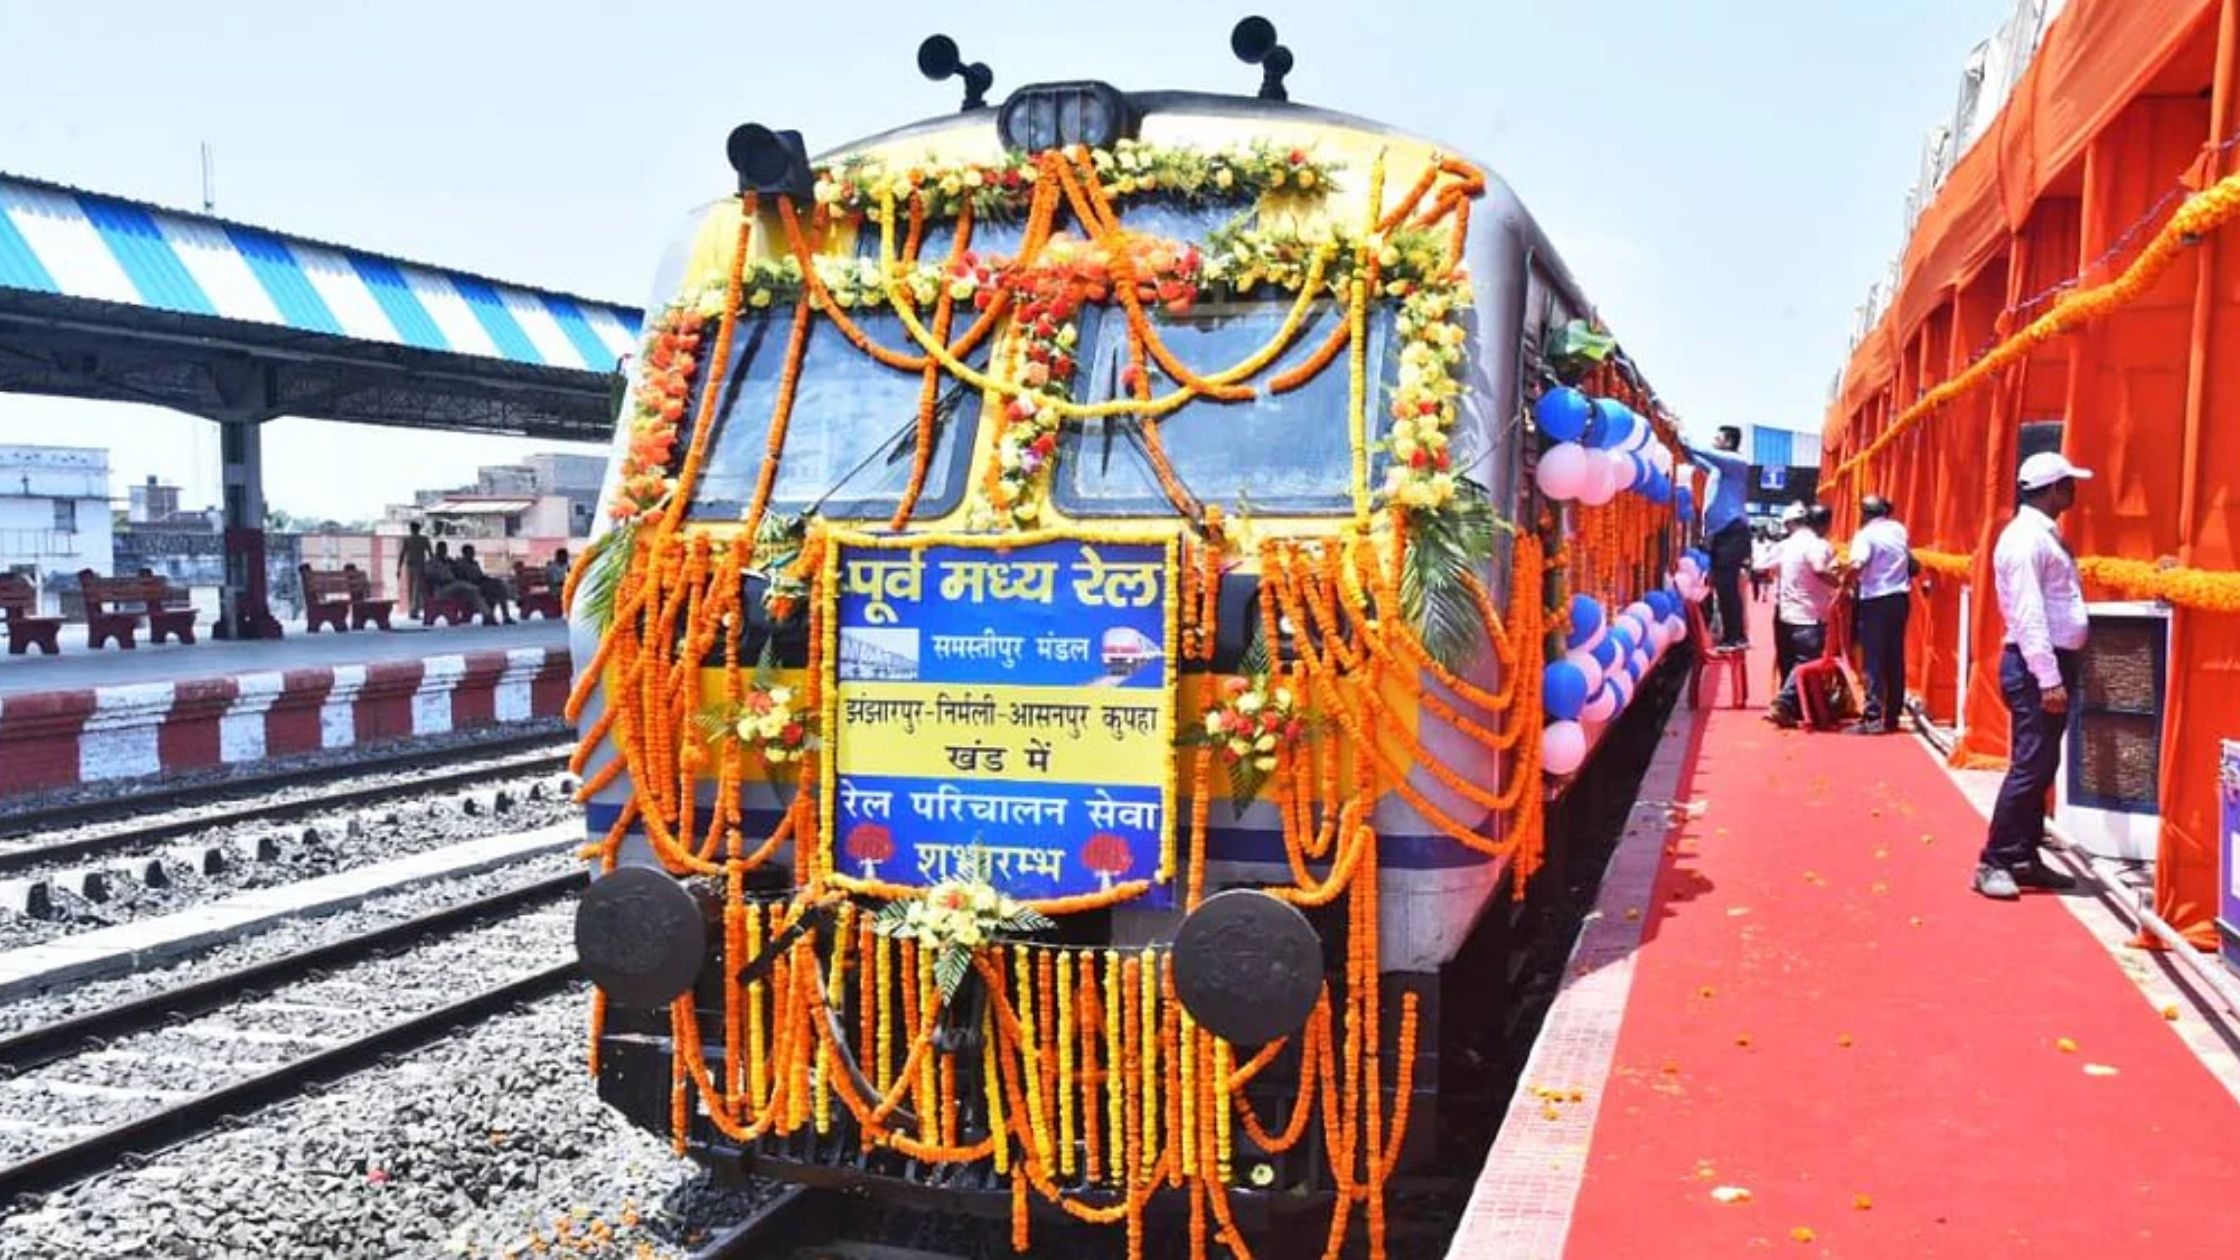 Train reached Saharsa from Jhanjharpur after 88 years